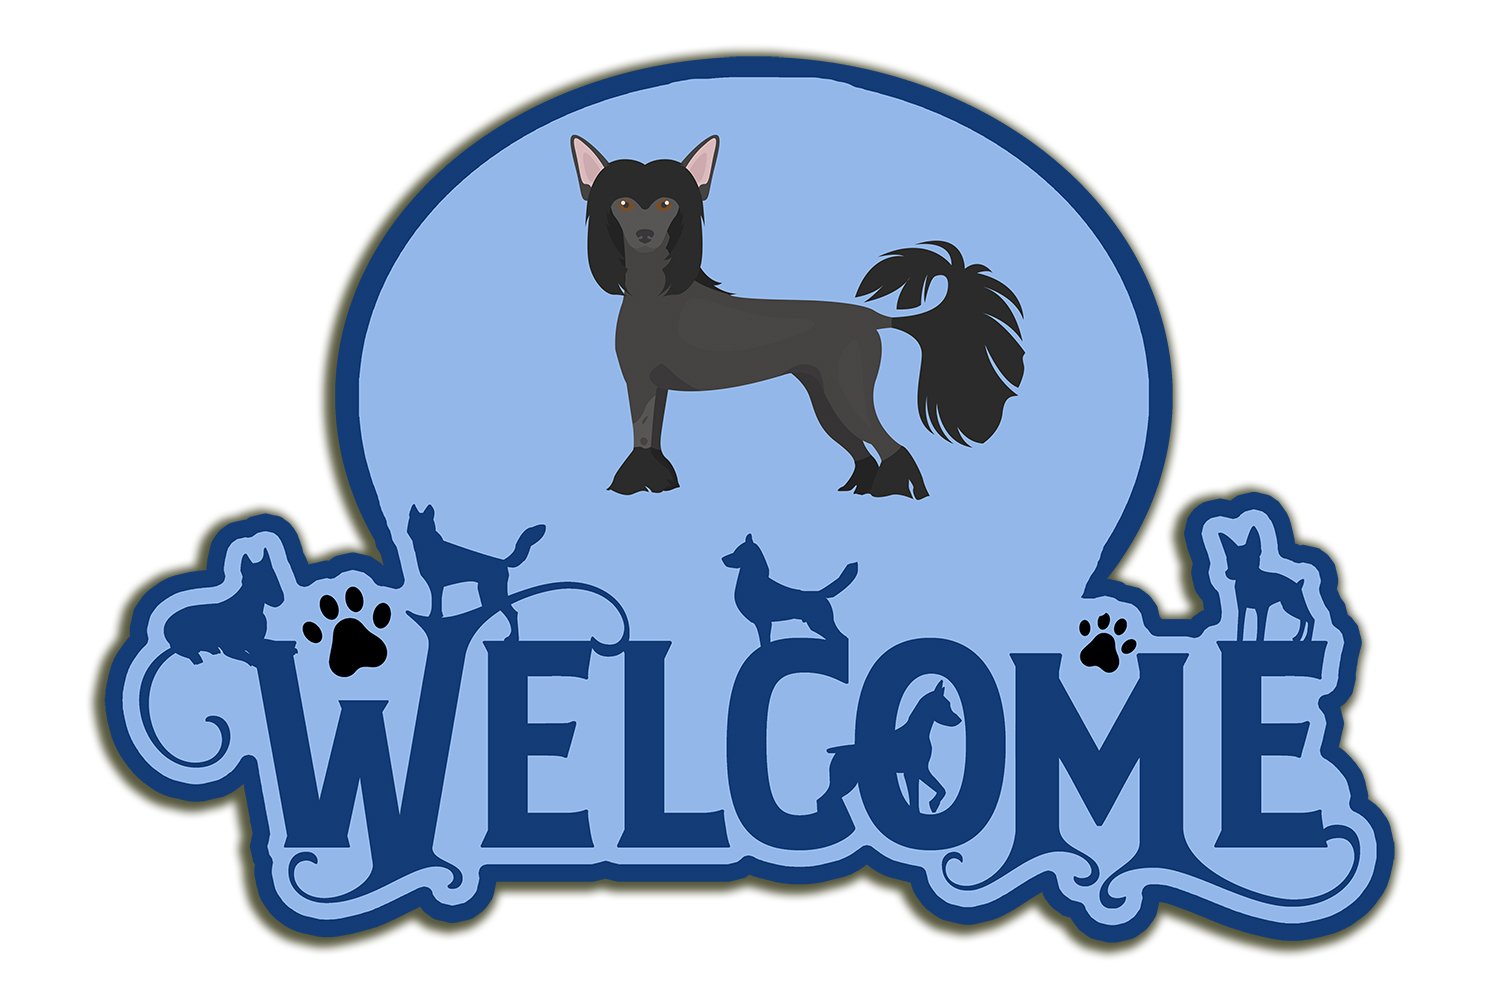 Buy this Chinese Crested #1 Welcome Door Hanger Decoration